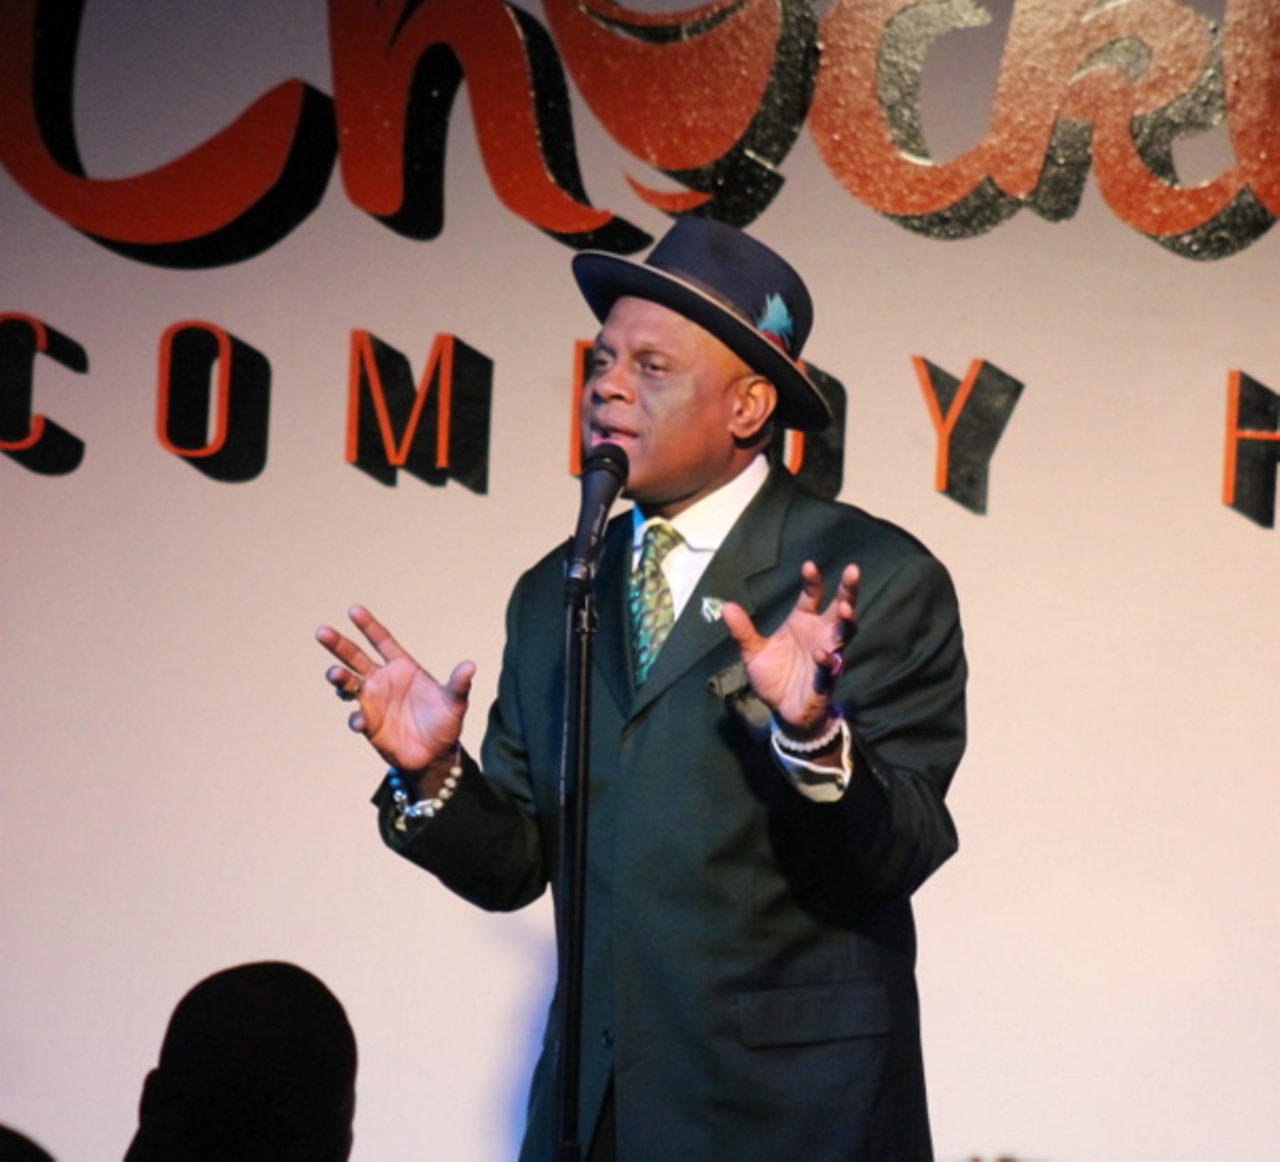 Friday: Comedian Michael Colyar is a comedy veteran. He&#146;s mostly known for his performances in Venice Beach where he would make the crowd laugh every weekend when he performed five one-hour shows. His jokes aren&#146;t designed to appeal solely to fans of a certain ethnicity, age or background: Colyar aims at making everyone laugh. He performs tonight at 7:30 at the Improv. Tickets are $20 with performances scheduled through Sunday.